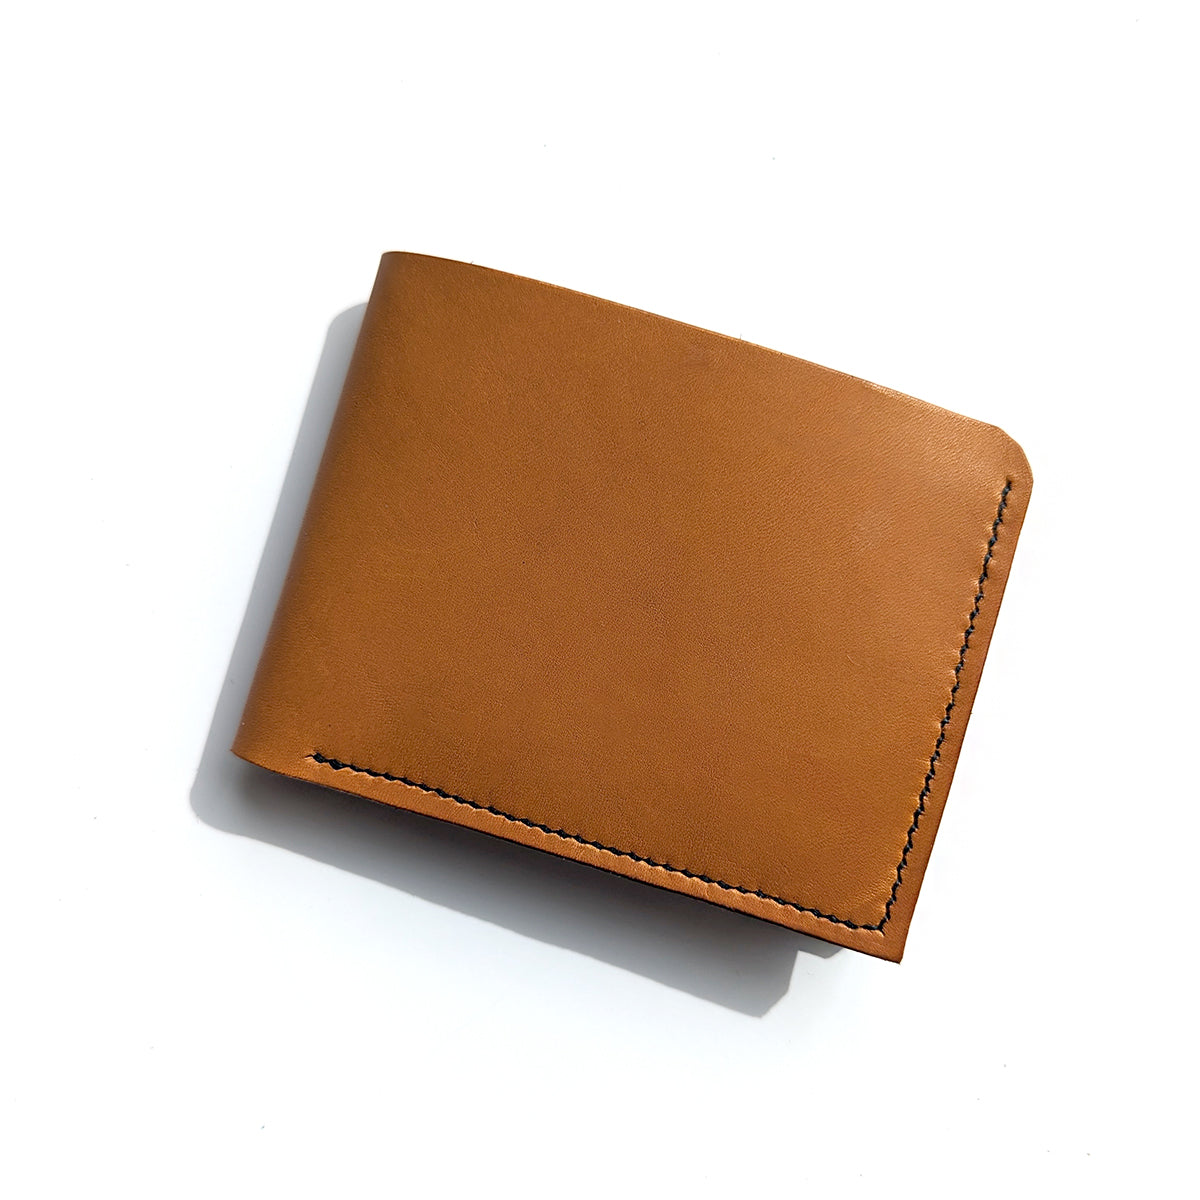 Leather Billfold with 5 pockets, handsewn